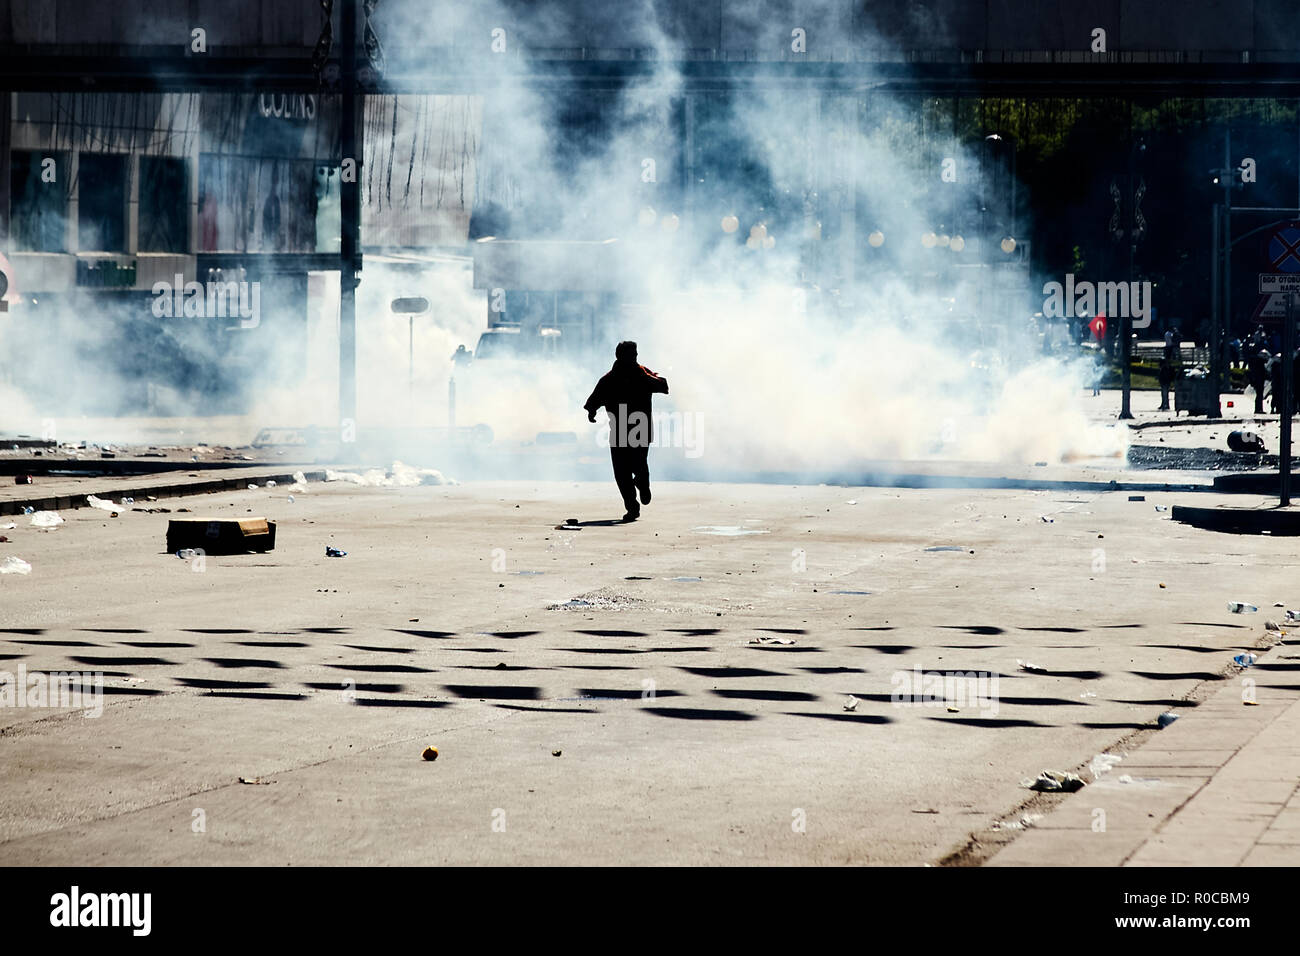 A protester trying to run away from the tear gas fired by the police during the Gezi park protests in Ankara, Turkey Stock Photo